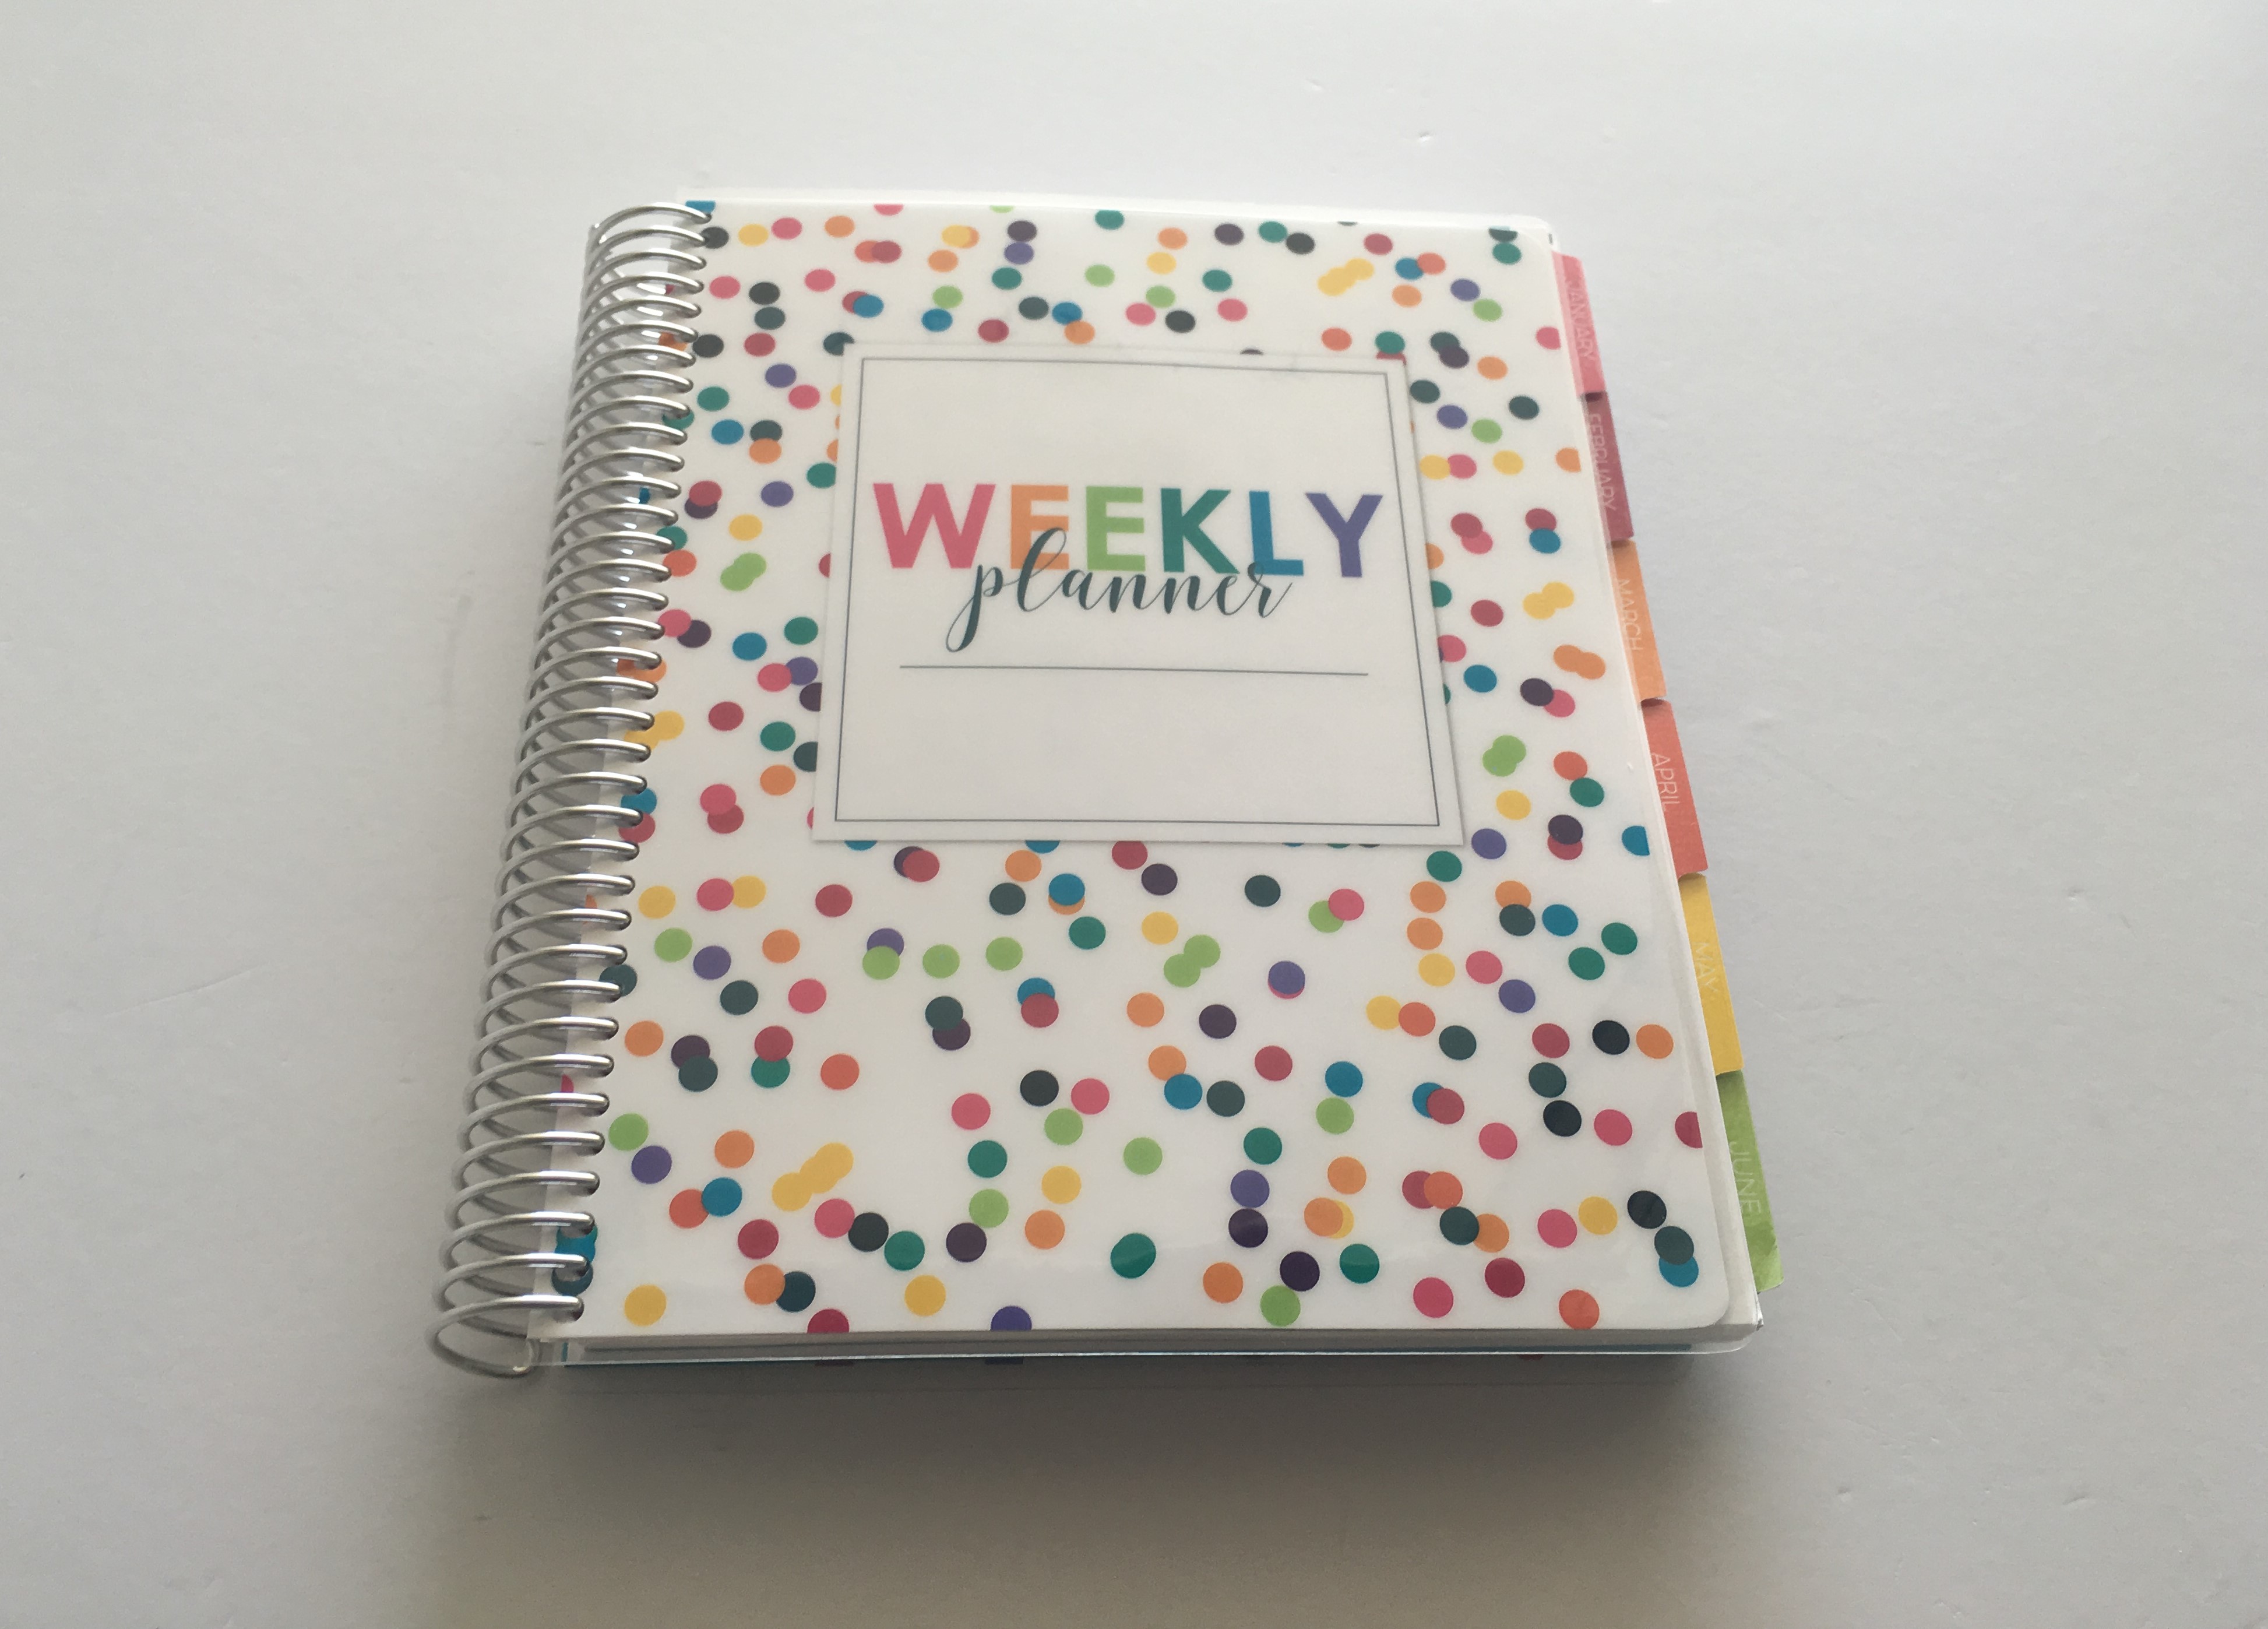 limelife weekly planner review layout c confetti dots rainbow layout student school personalised mom organizer agenda daily spiral bound 2 page monthly calendar